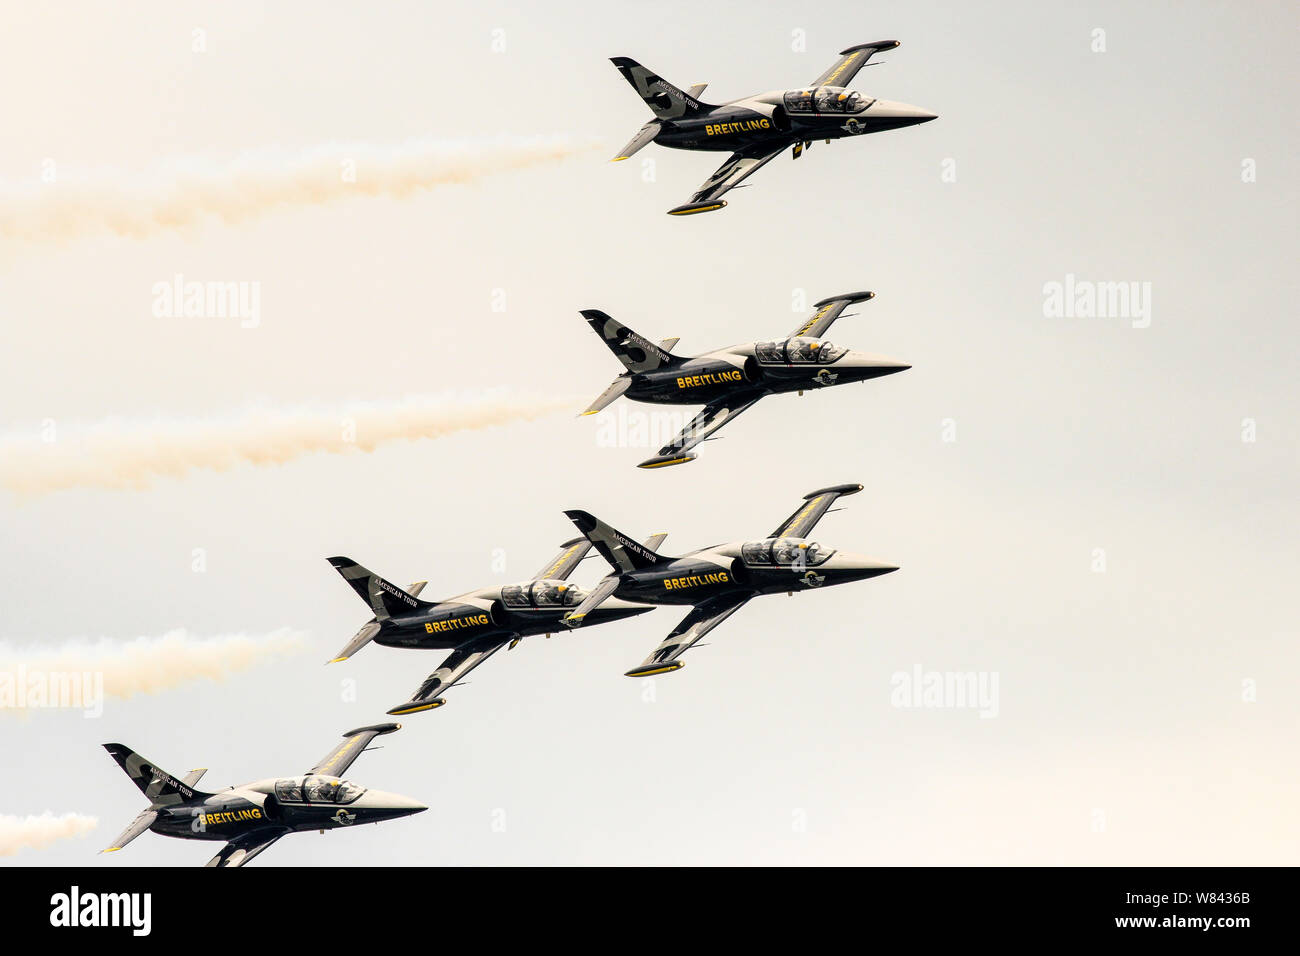 Breitling Jet Team performing fascinating aerobatic stunts in the sky in an airshow Stock Photo